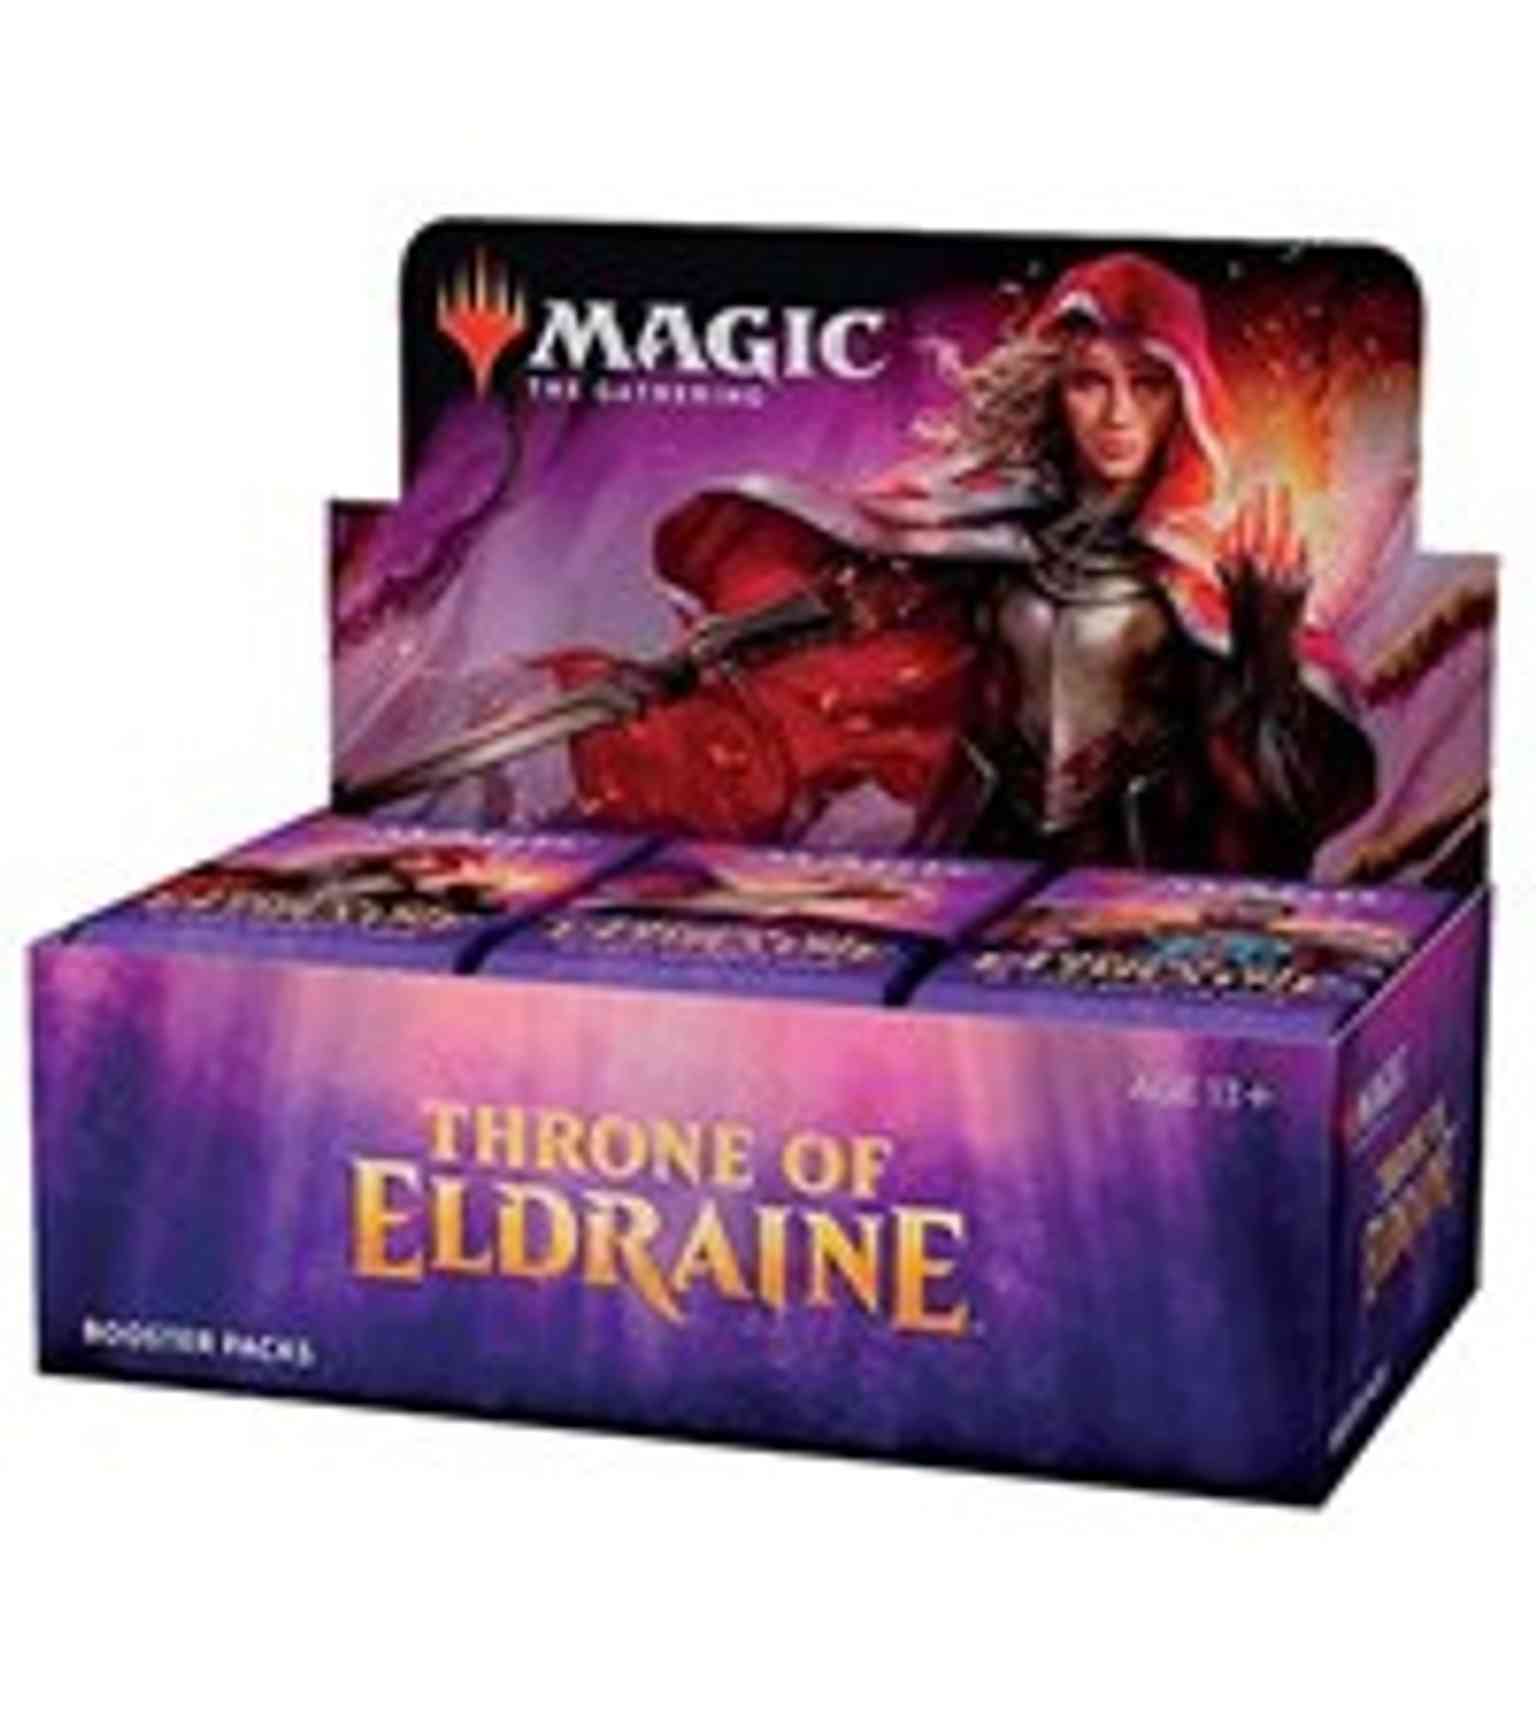 Throne of Eldraine - Booster Box magic card front